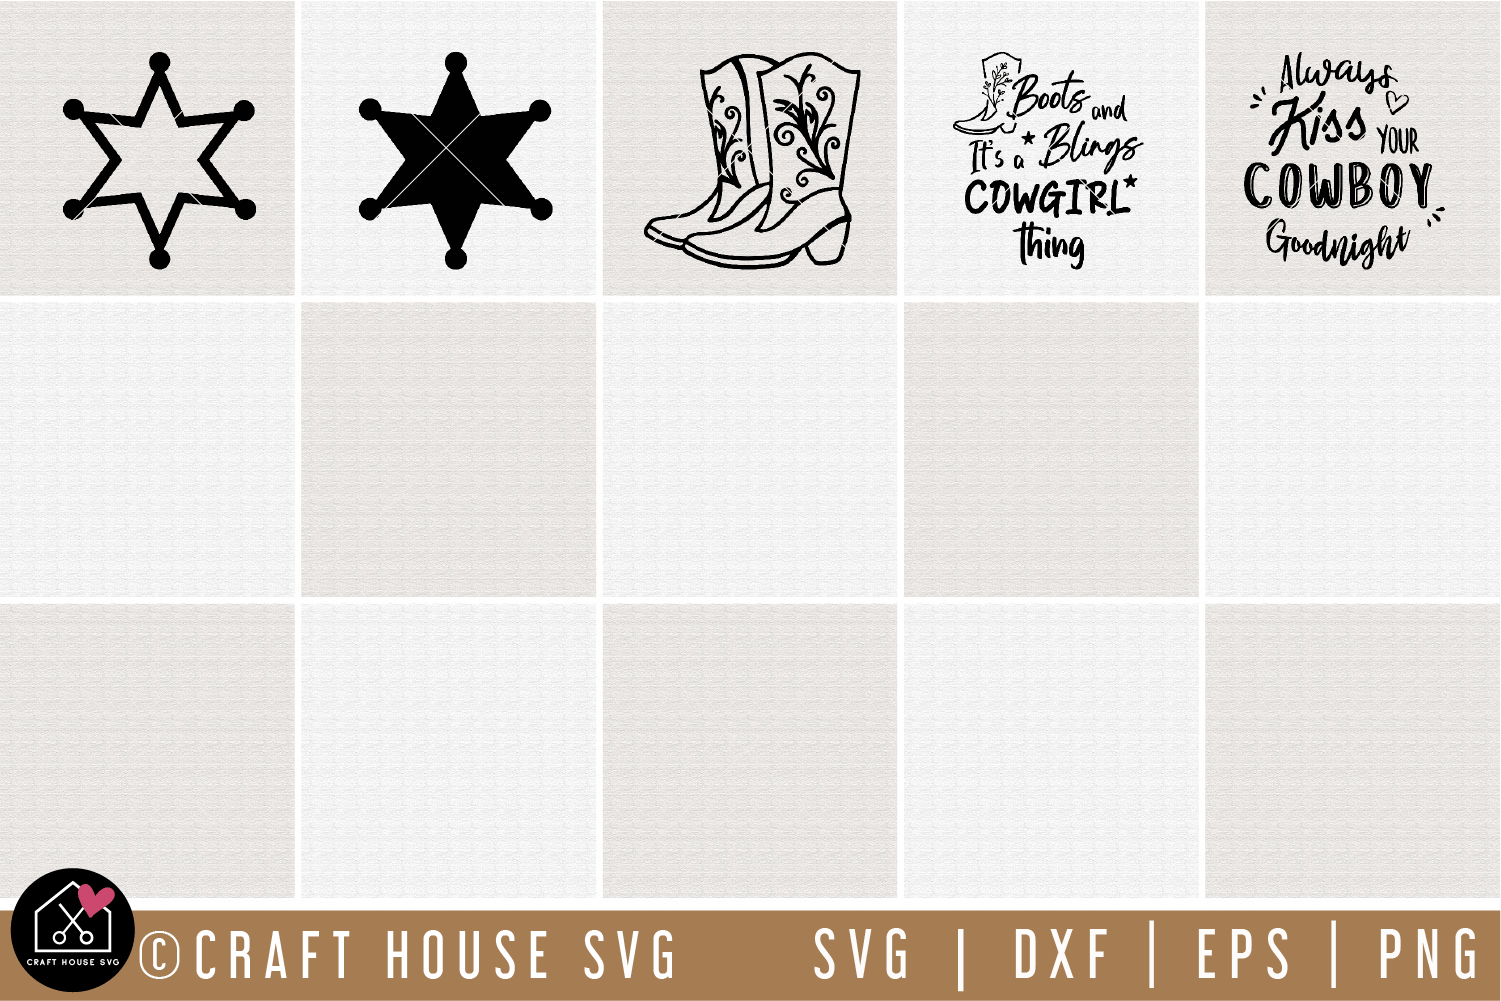 Western SVG Bundle | MB76 Craft House SVG - SVG files for Cricut and Silhouette